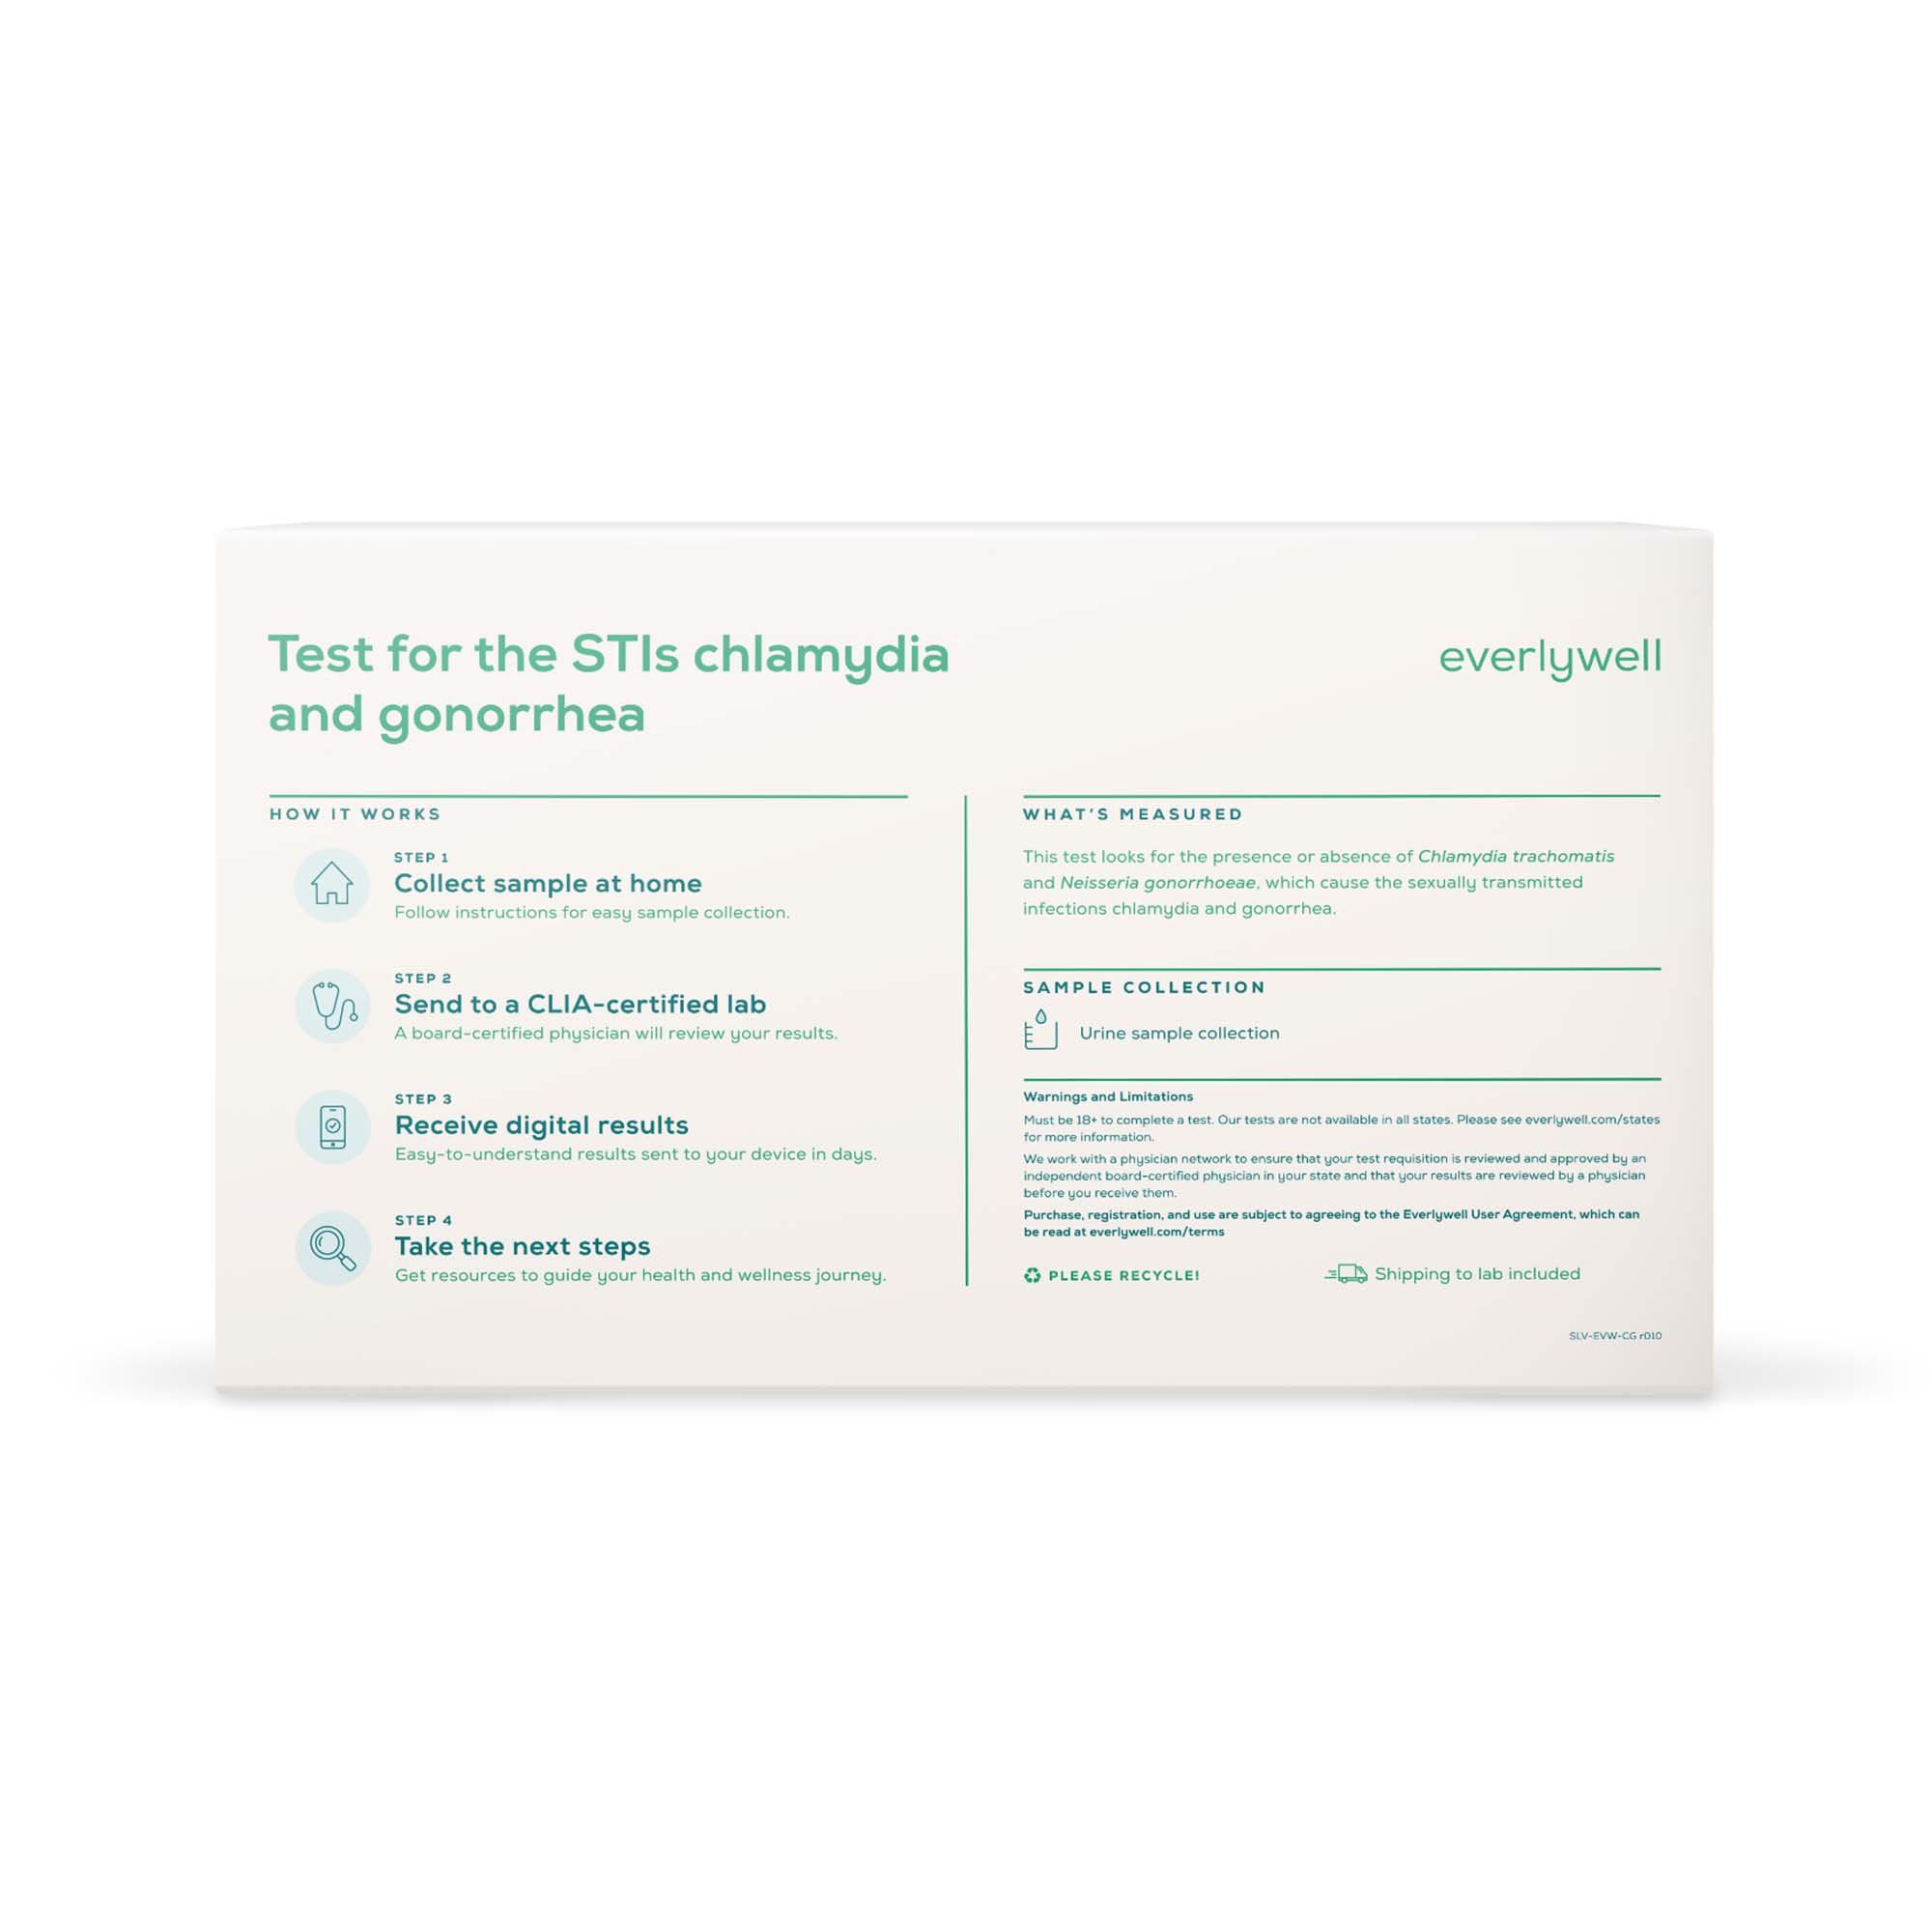 Everlywell Chlamydia & Gonorrhea Test - 1 Test Kit